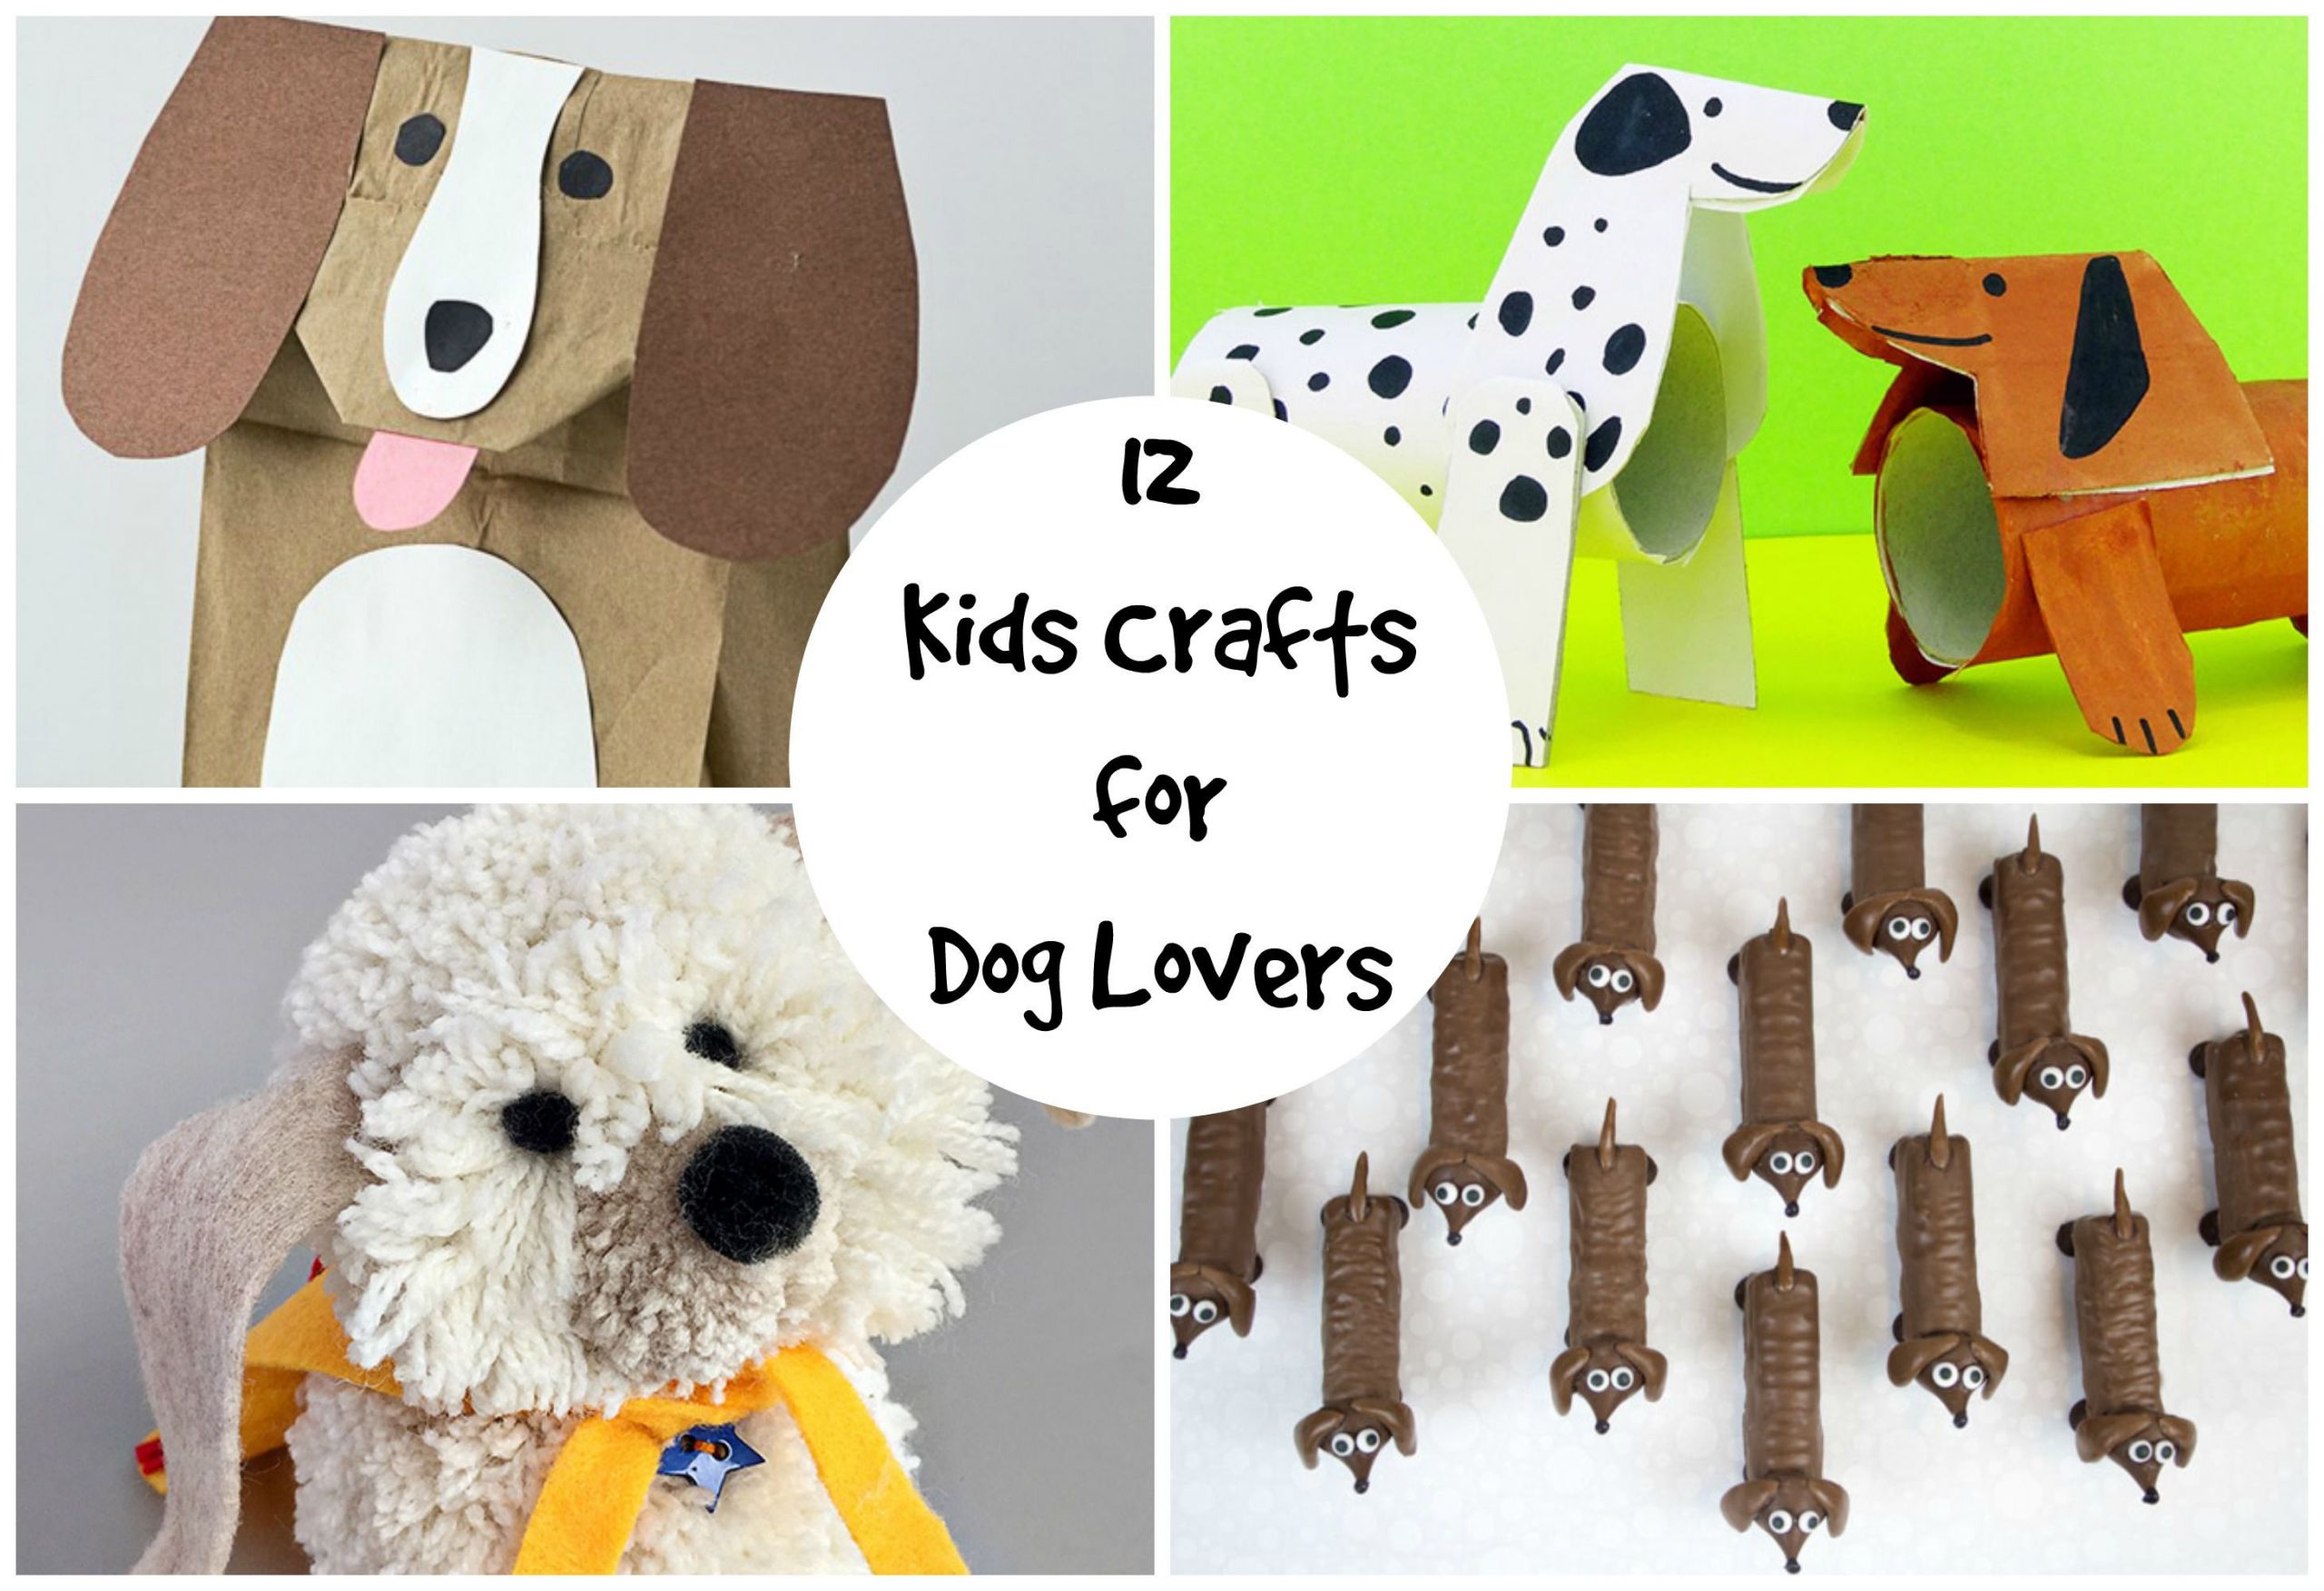 Craft Ideas For Dog Lovers
 12 Kids Crafts for Dog Lovers